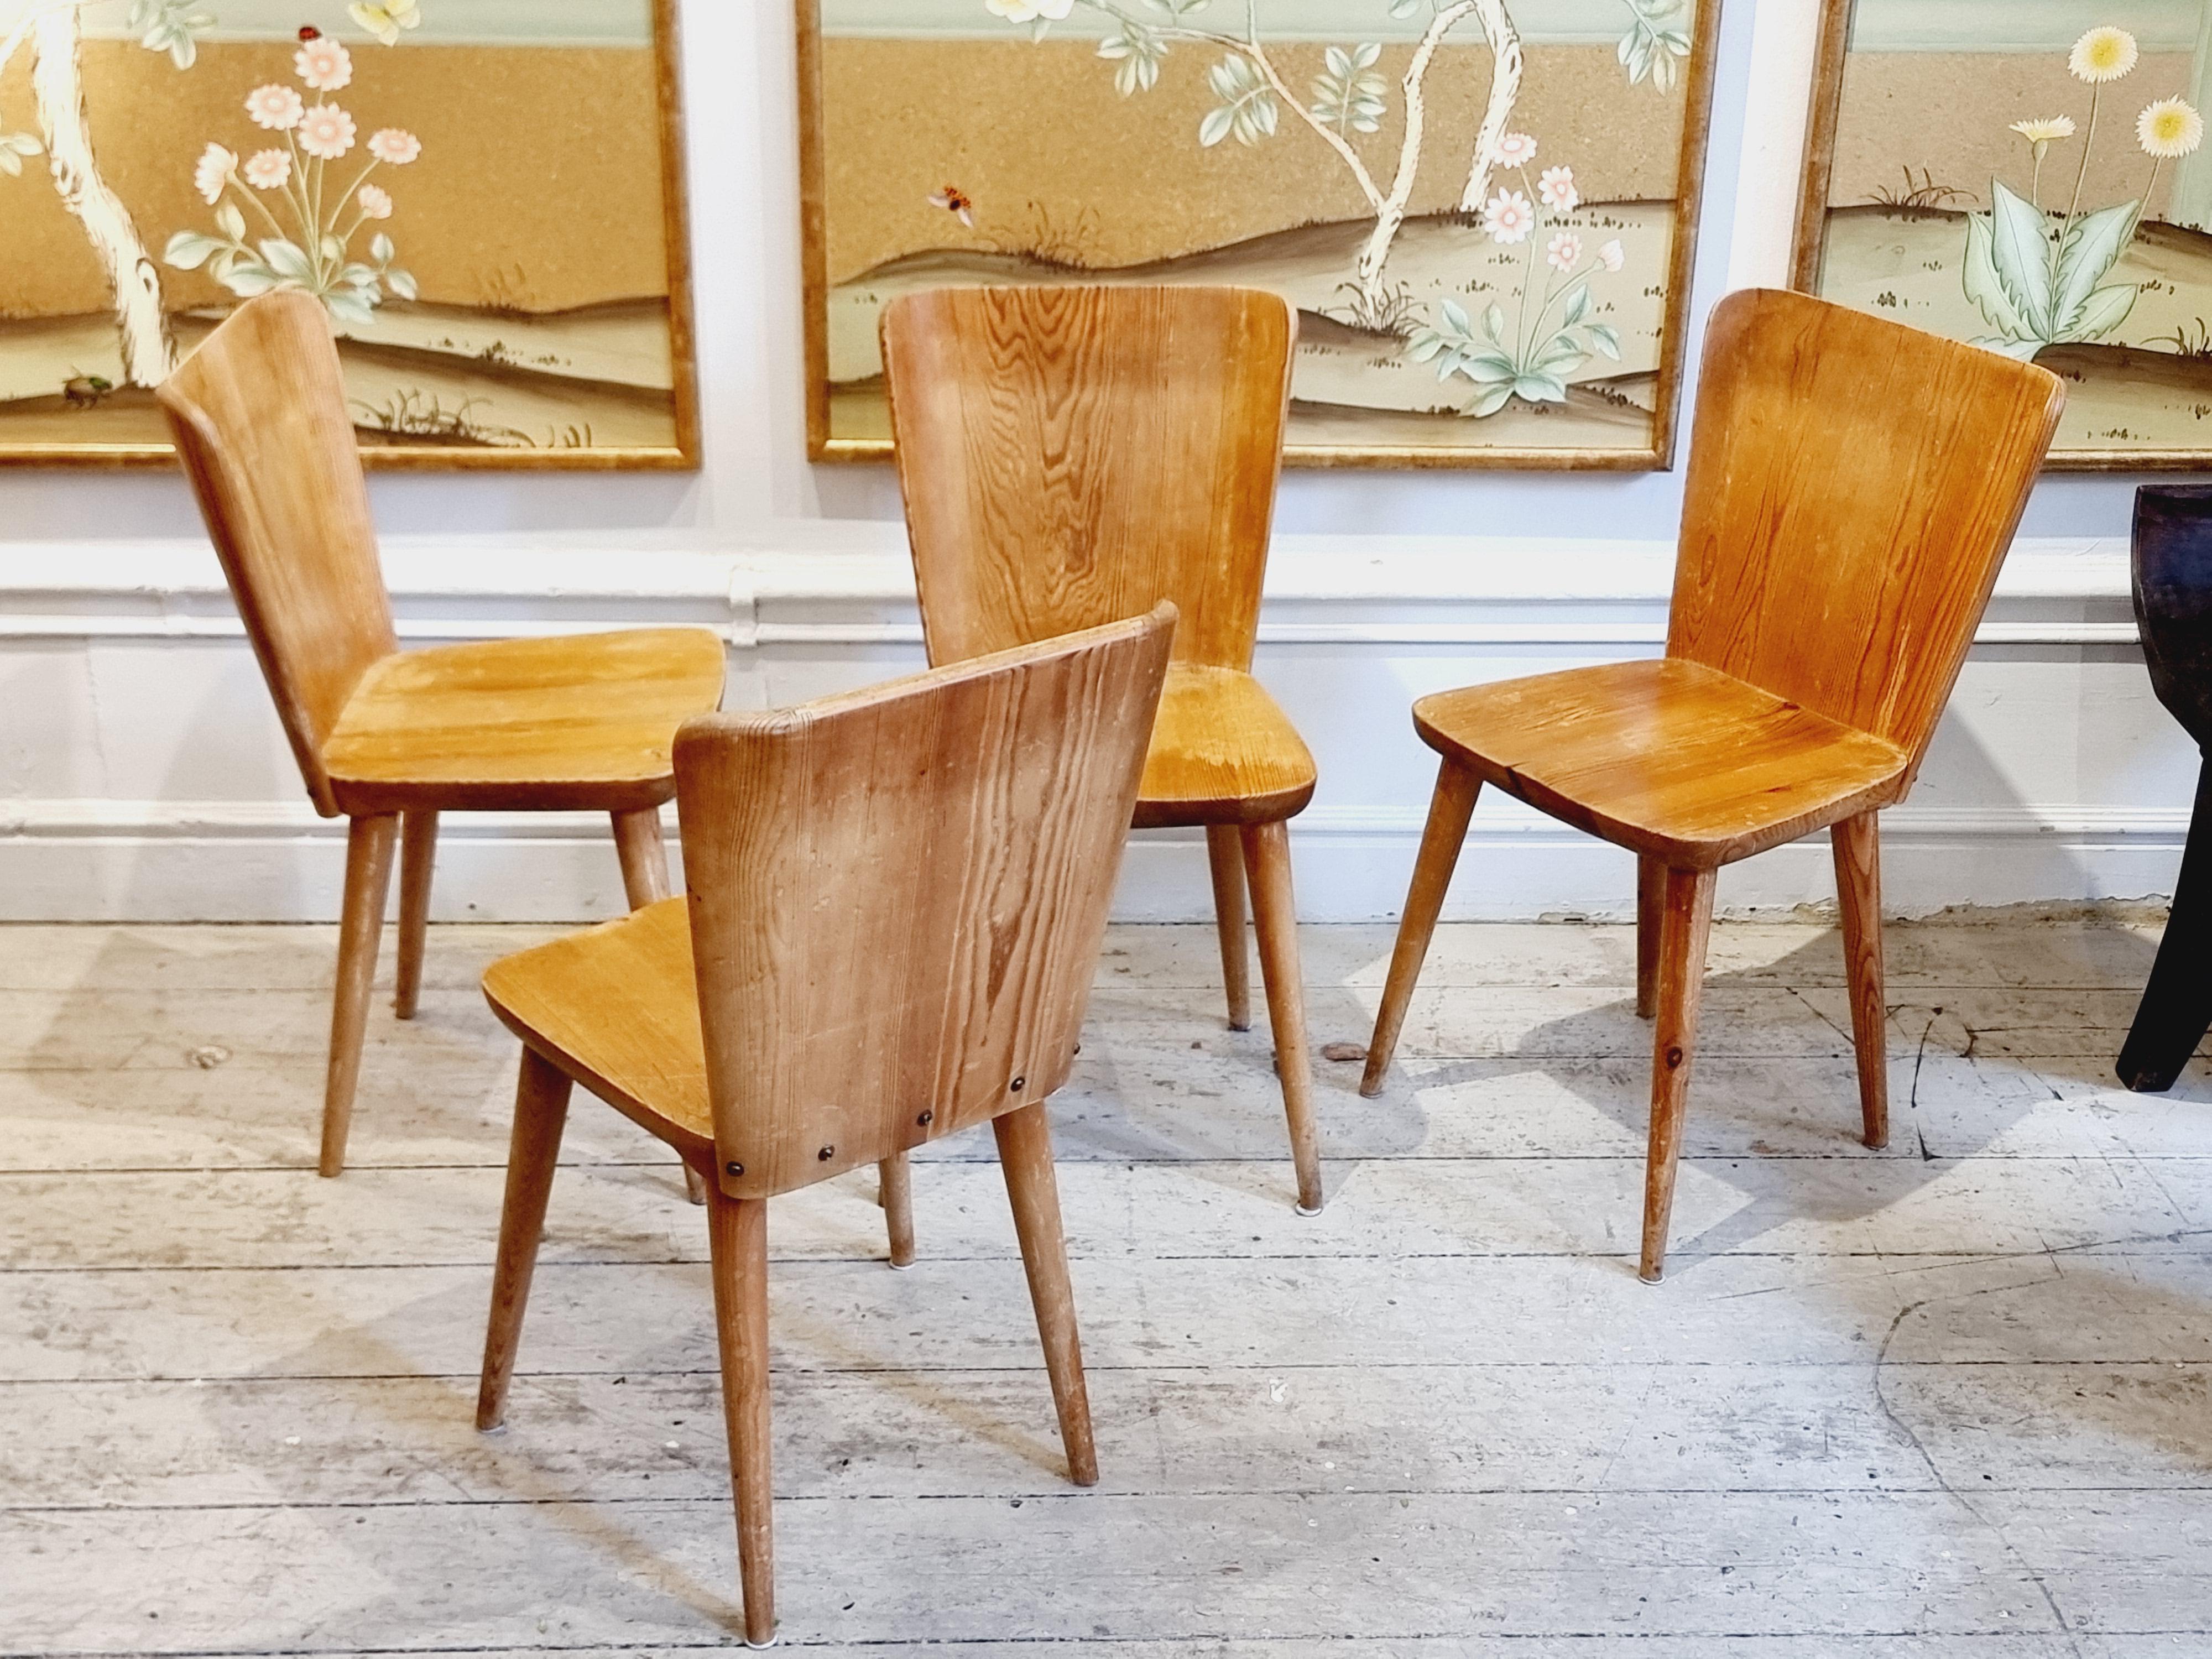 A set of four pine chairs, the classic swedish sportstugemodel 510, / the Svensk Fur - series. Designed by Göran Malmvall (1917-2001) for Karl Andersson & Söner, mid-1900s. 

A true Sportstugemöbel classic! In the style of Axel Einar Hjorth, whom